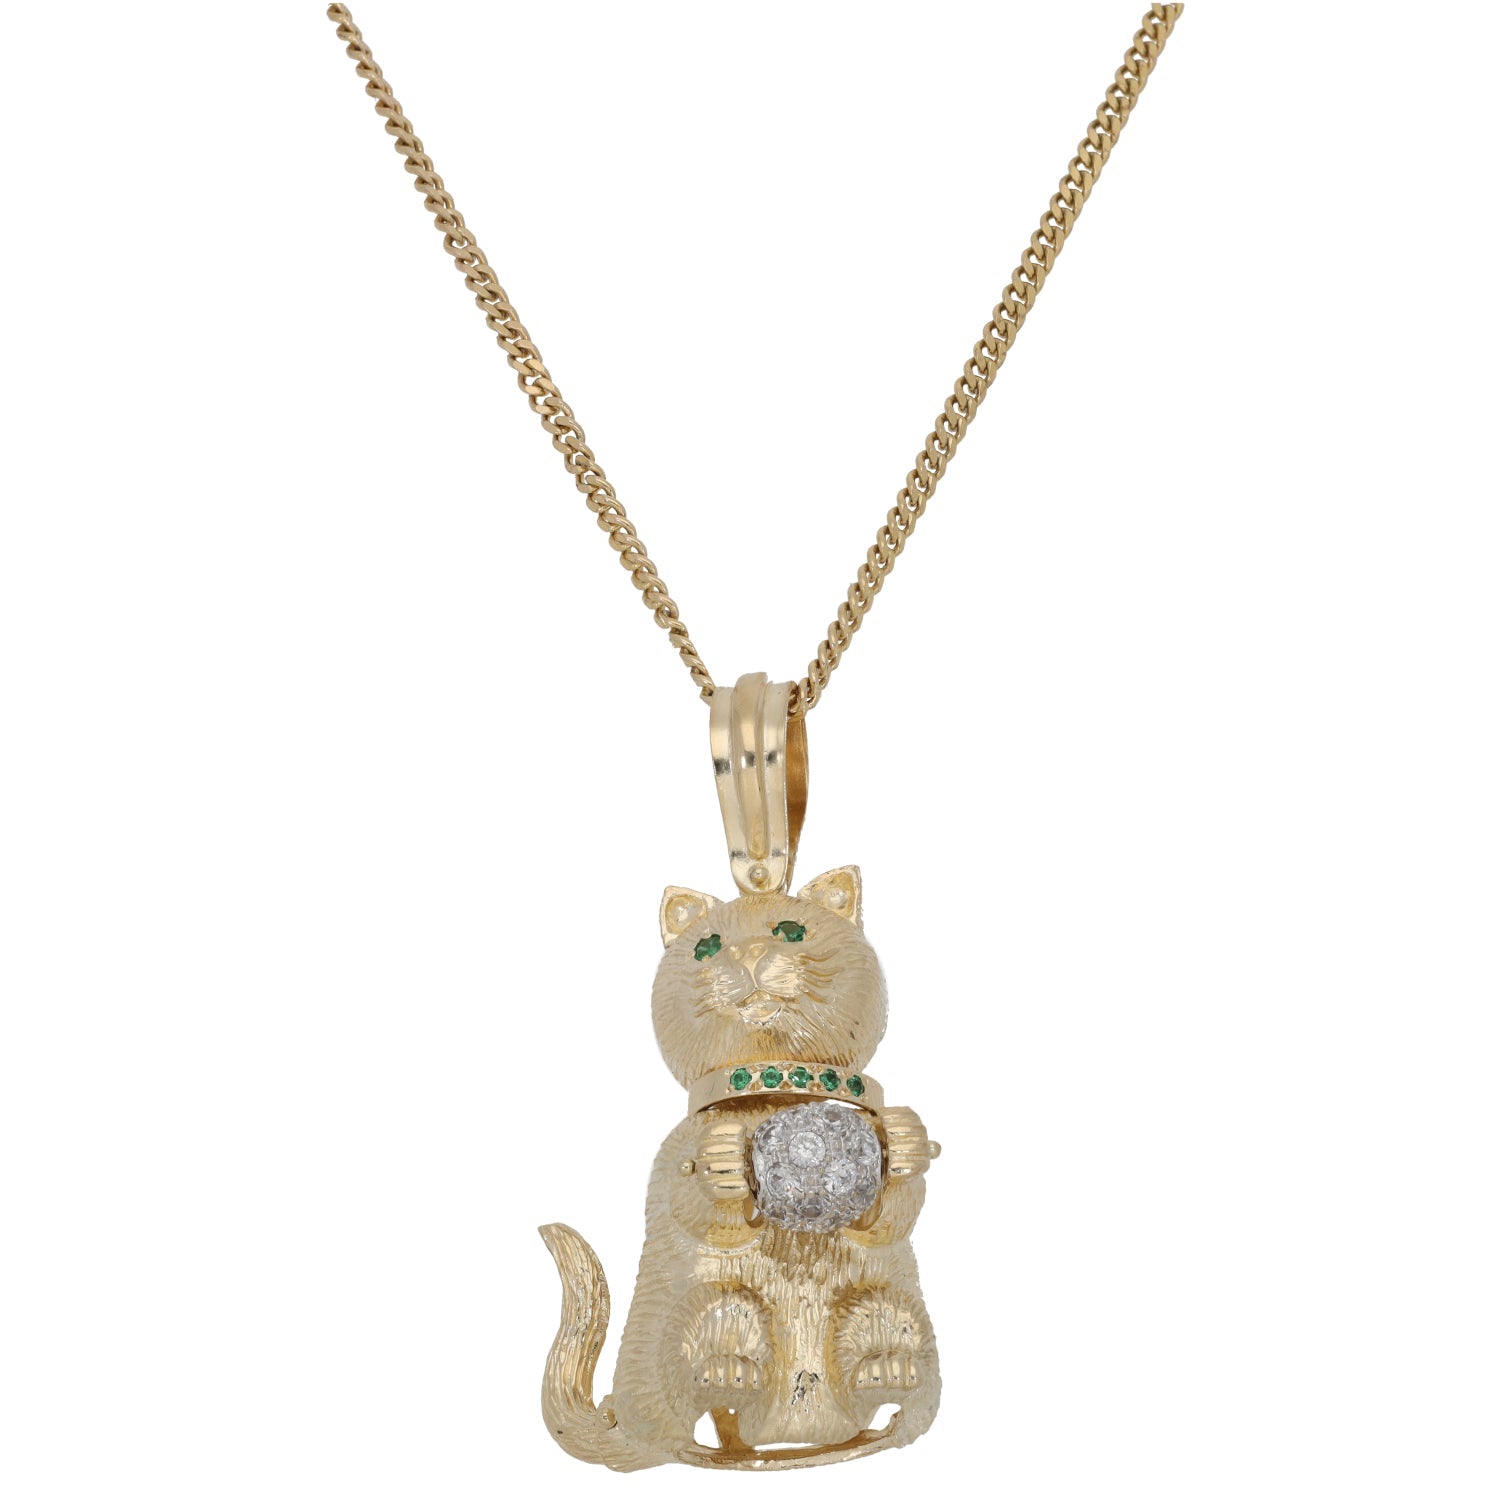 9kt yellow gold cat pendant necklace